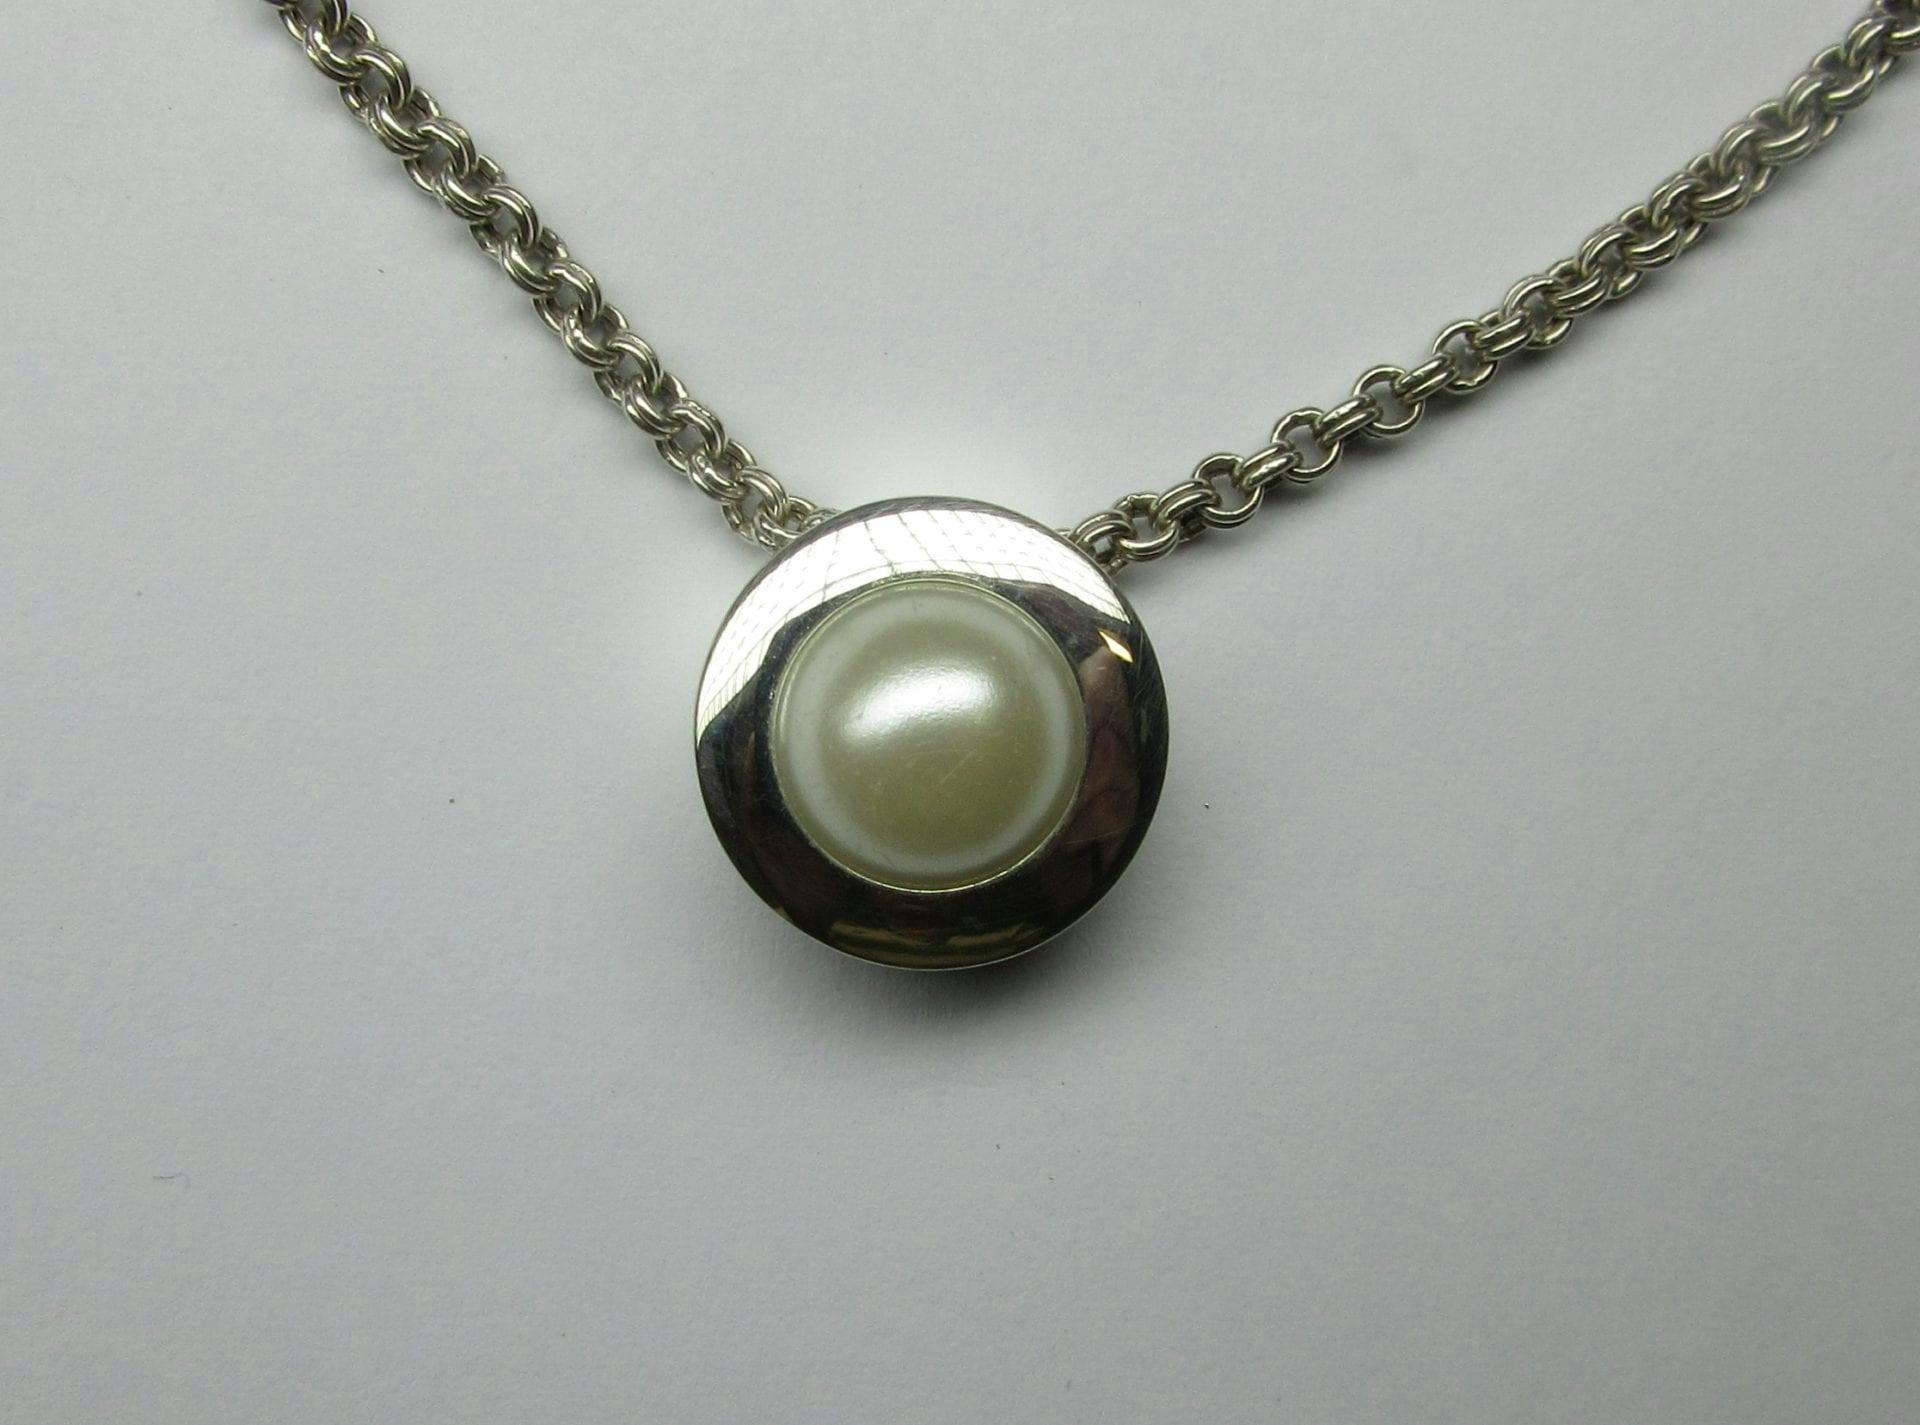 How to Make a Thick Bezel Set Pendant